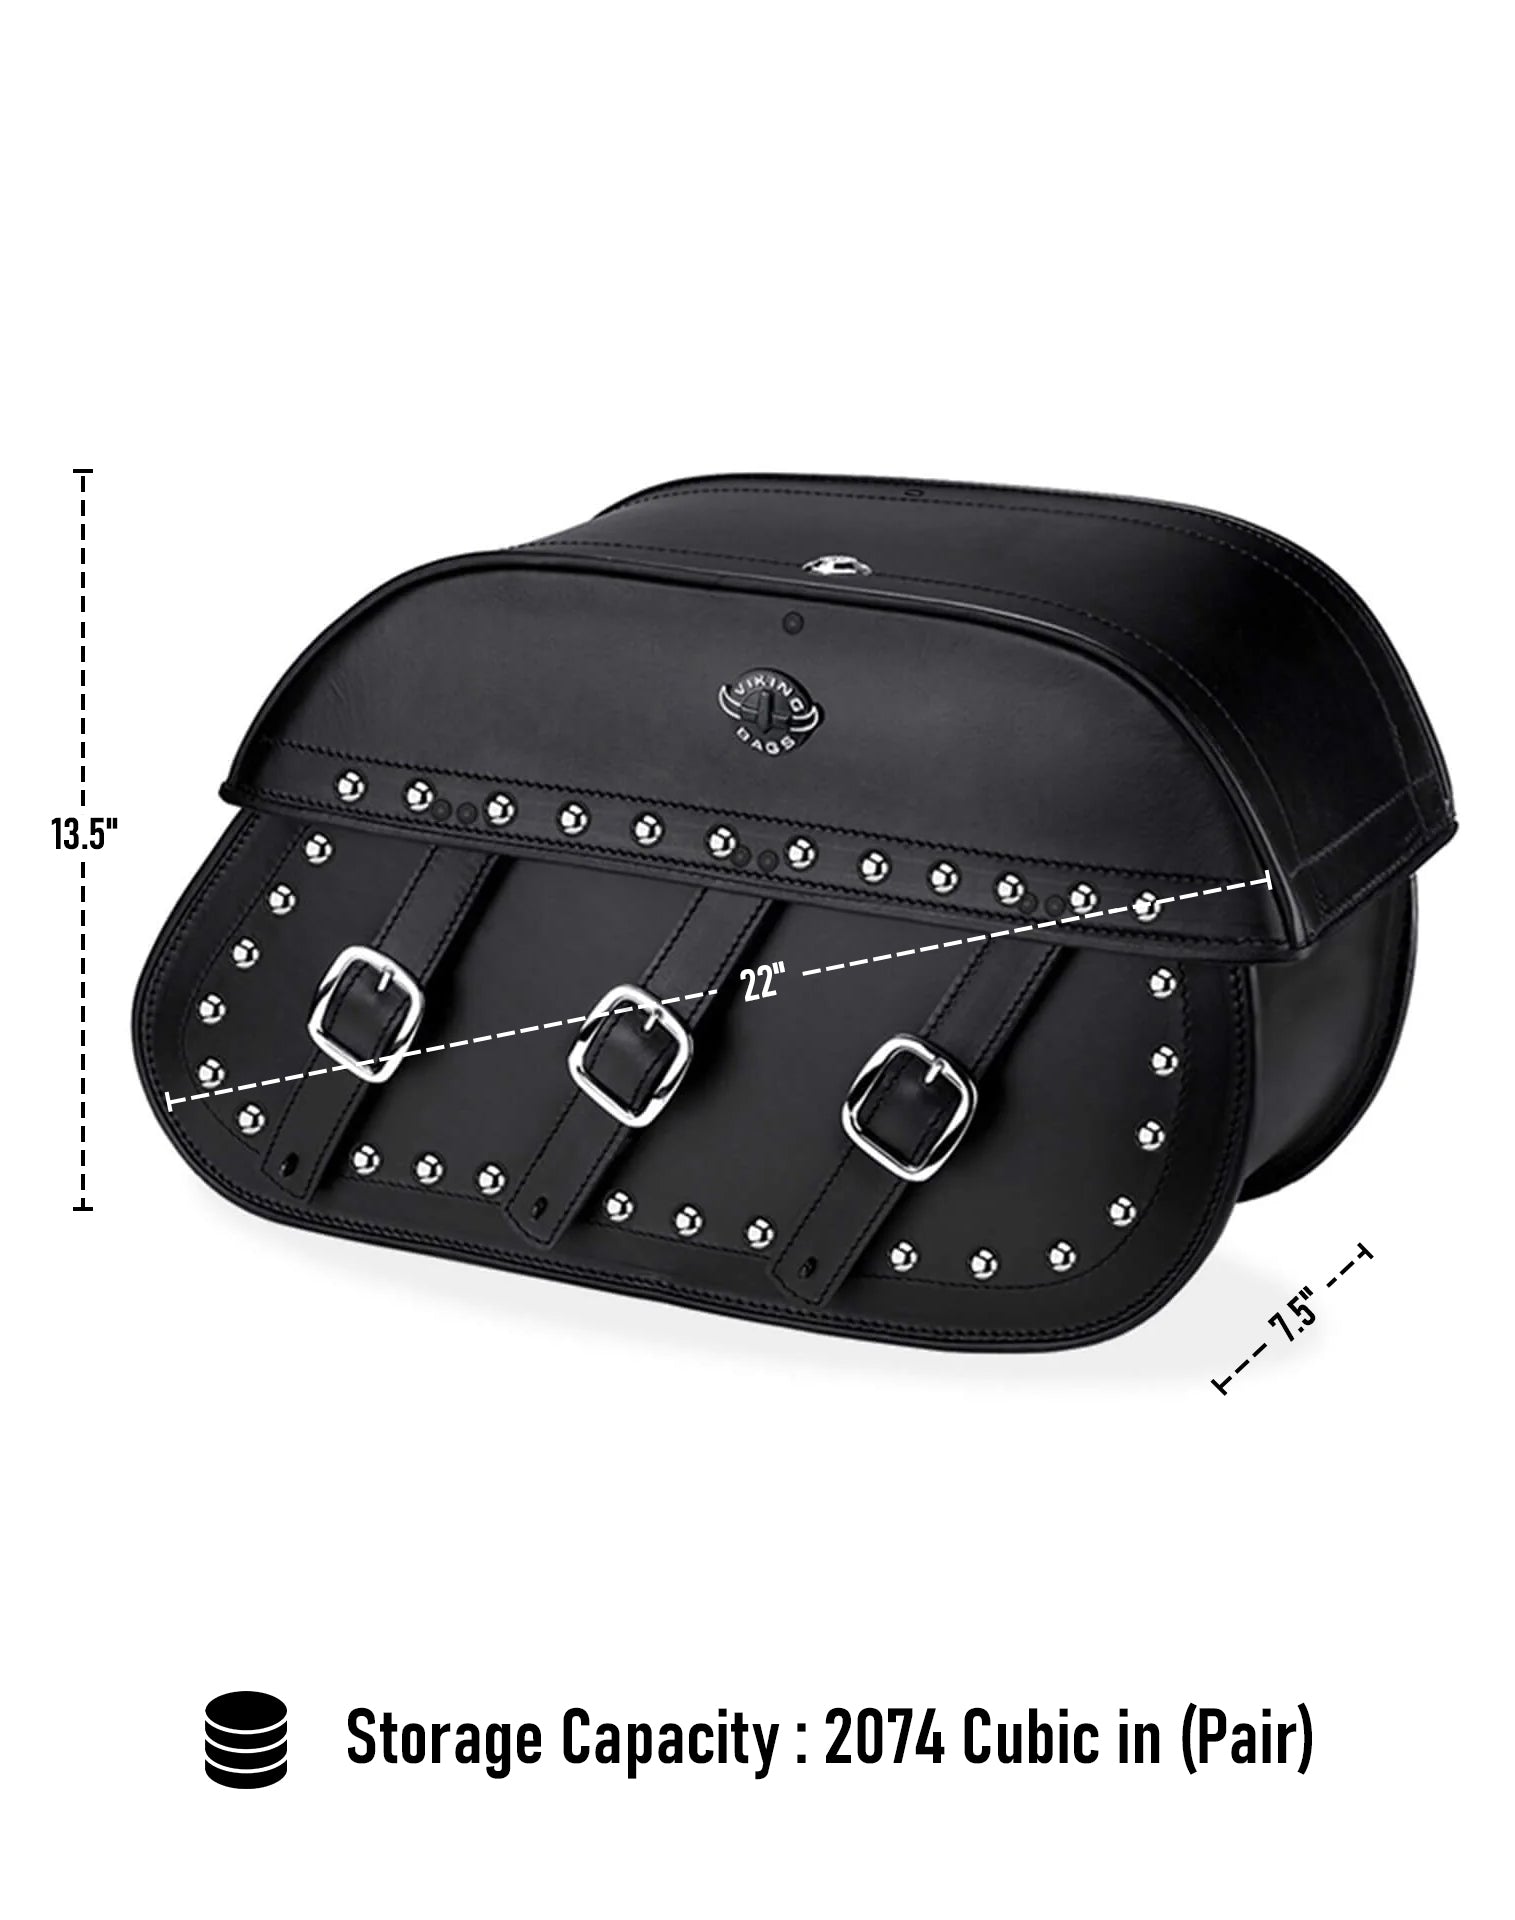 Viking Trianon Extra Large Studded Leather Motorcycle Saddlebags For Harley Softail Low Rider St Fxlrst Can Store Your Ridings Gears